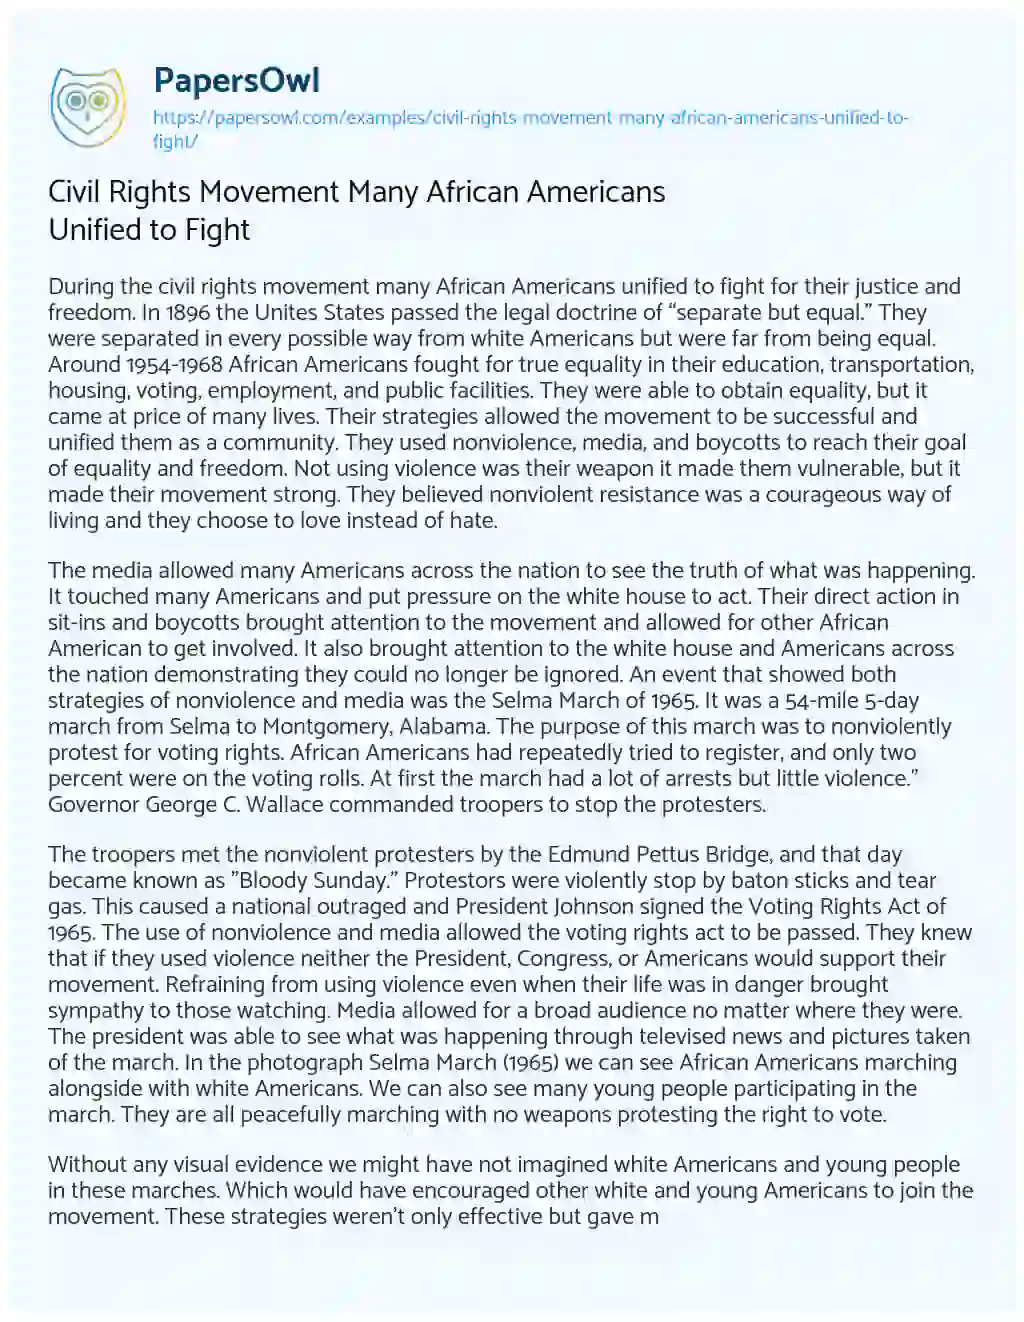 Essay on Civil Rights Movement Many African Americans Unified to Fight